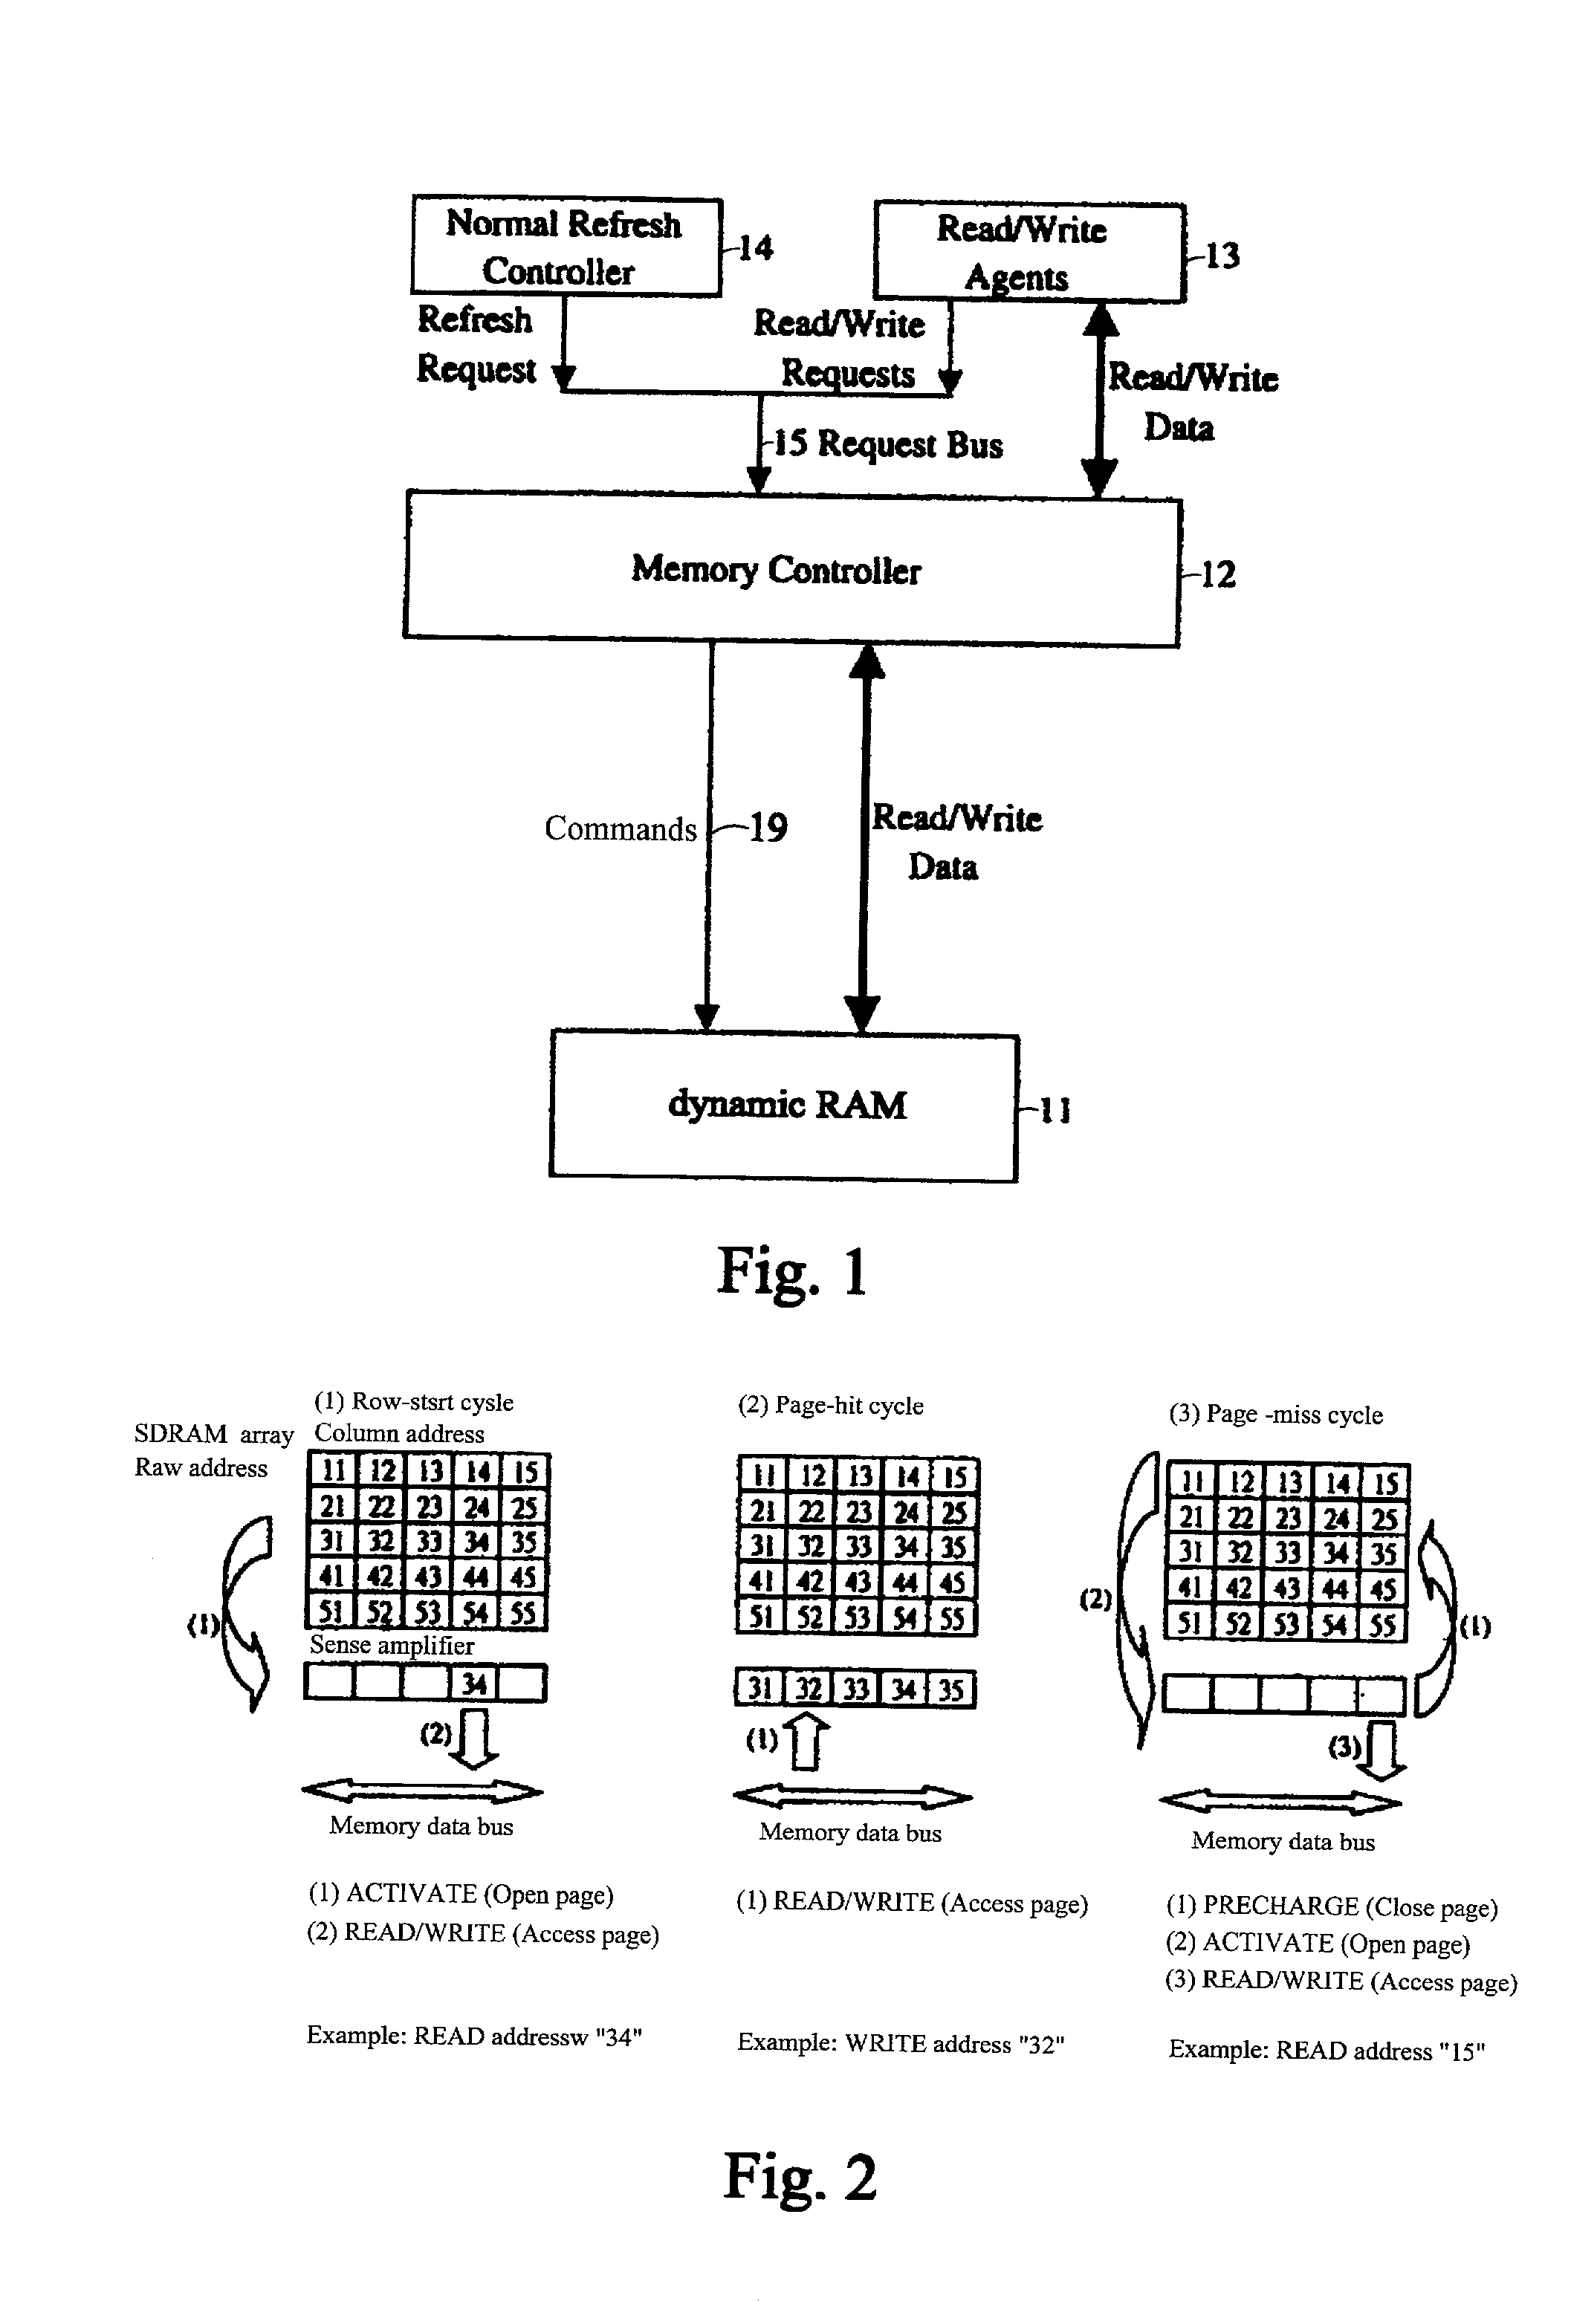 Method and apparatus of event-driven based refresh for high performance memory controller